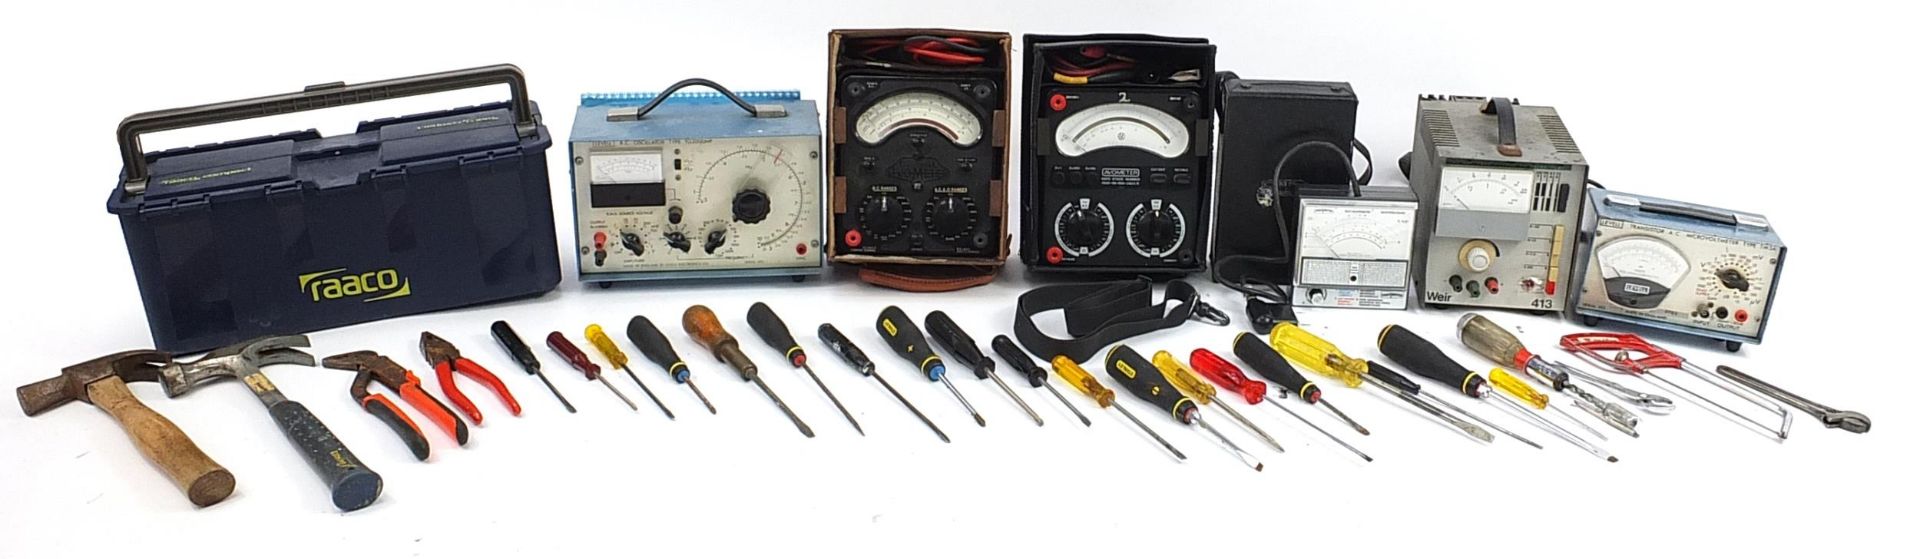 Vintage electrical testing equipment and a selection of tools comprising Levell R C oscillator